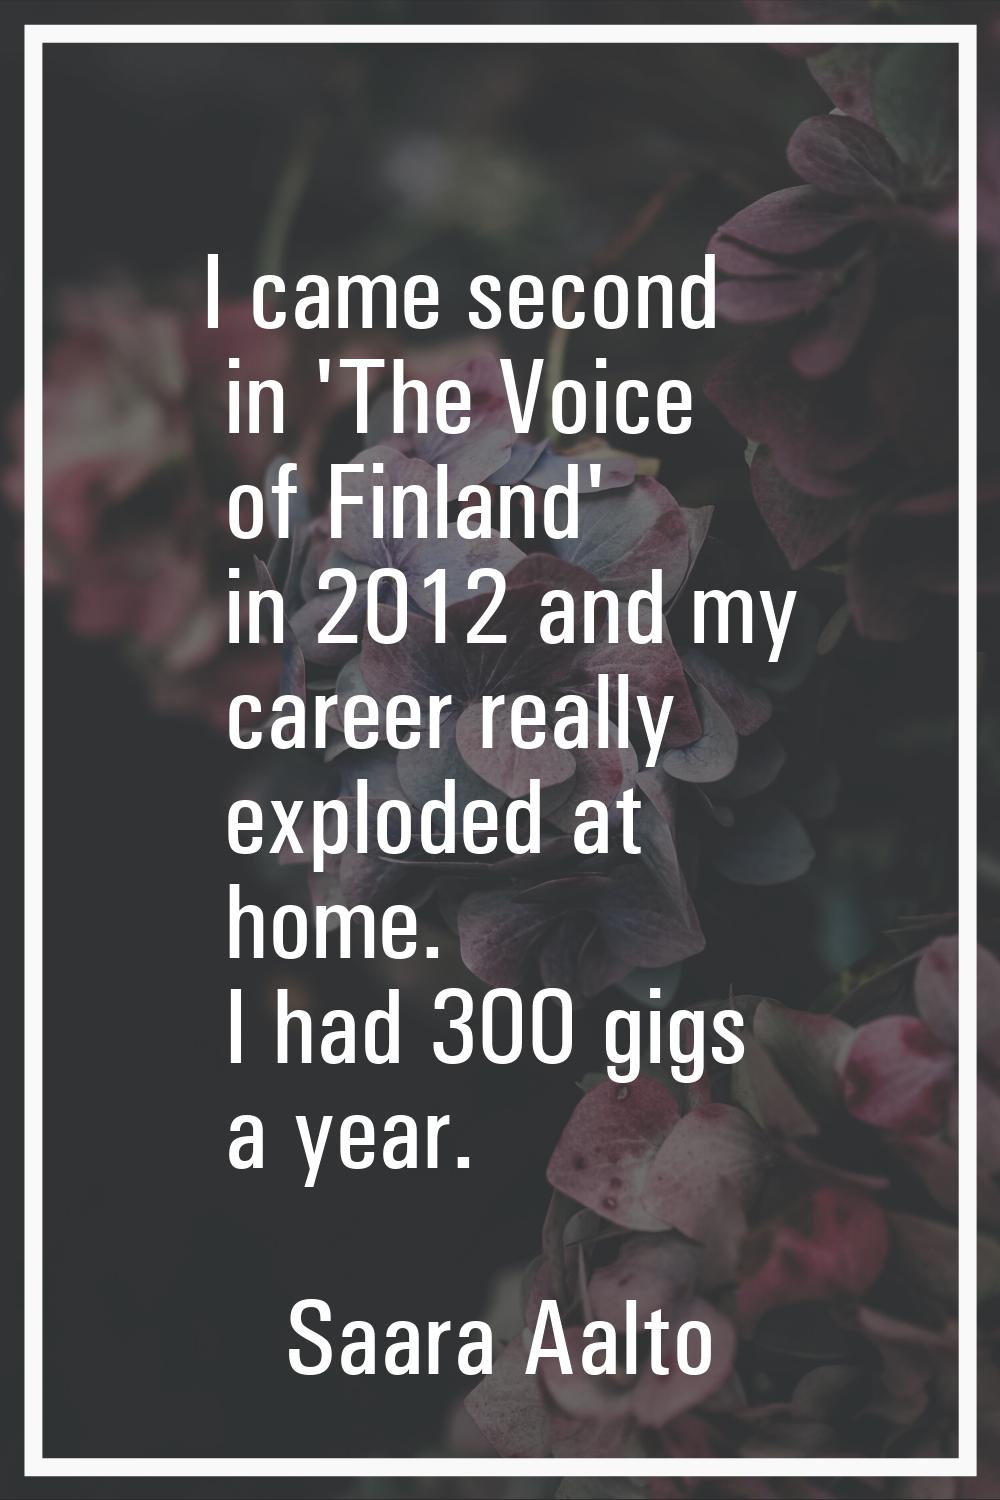 I came second in 'The Voice of Finland' in 2012 and my career really exploded at home. I had 300 gi